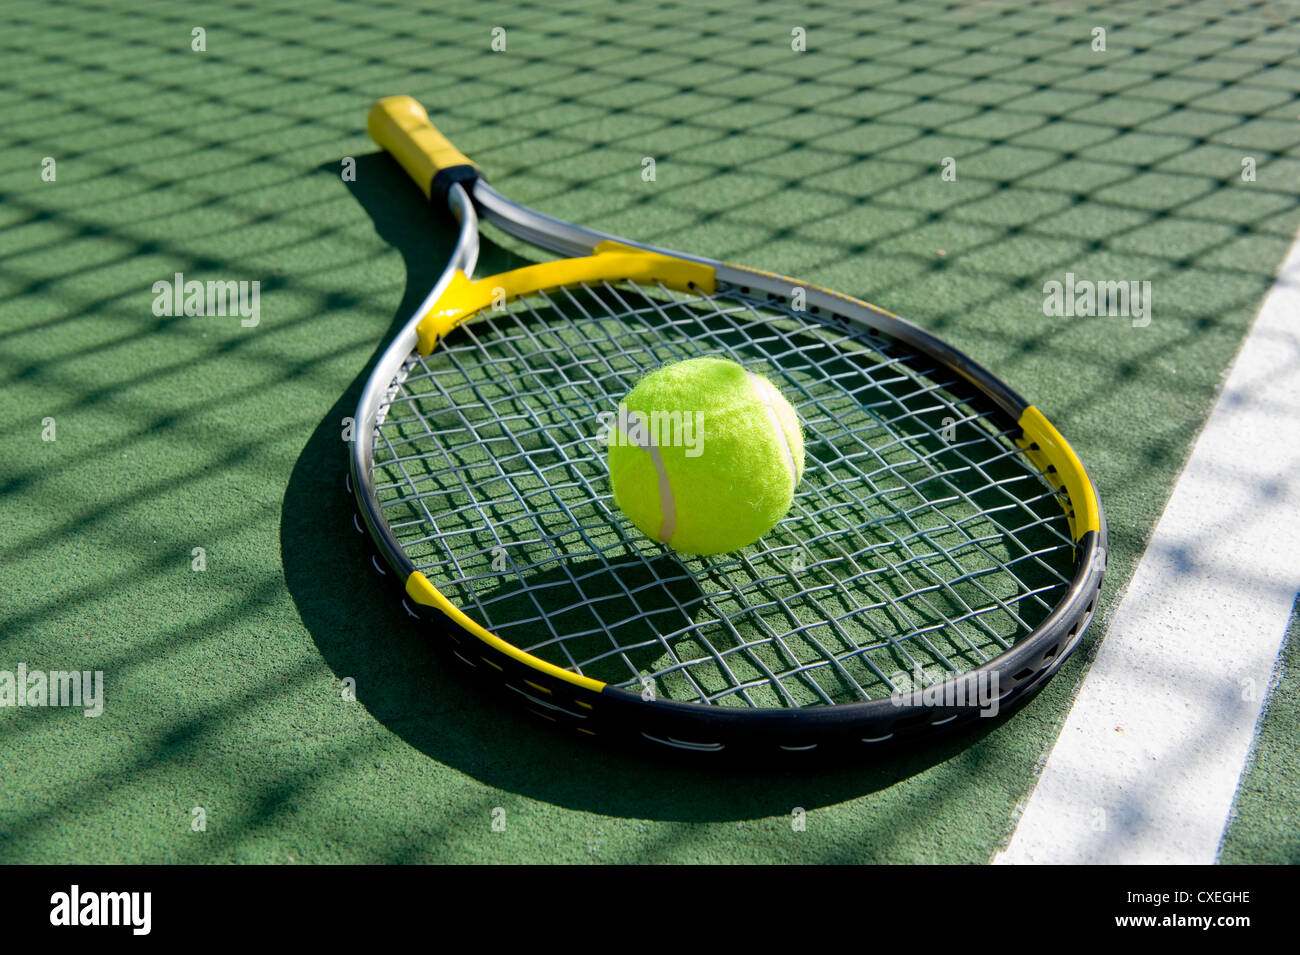 A tennis ball and racket on a freshly painted tennis court Stock Photo